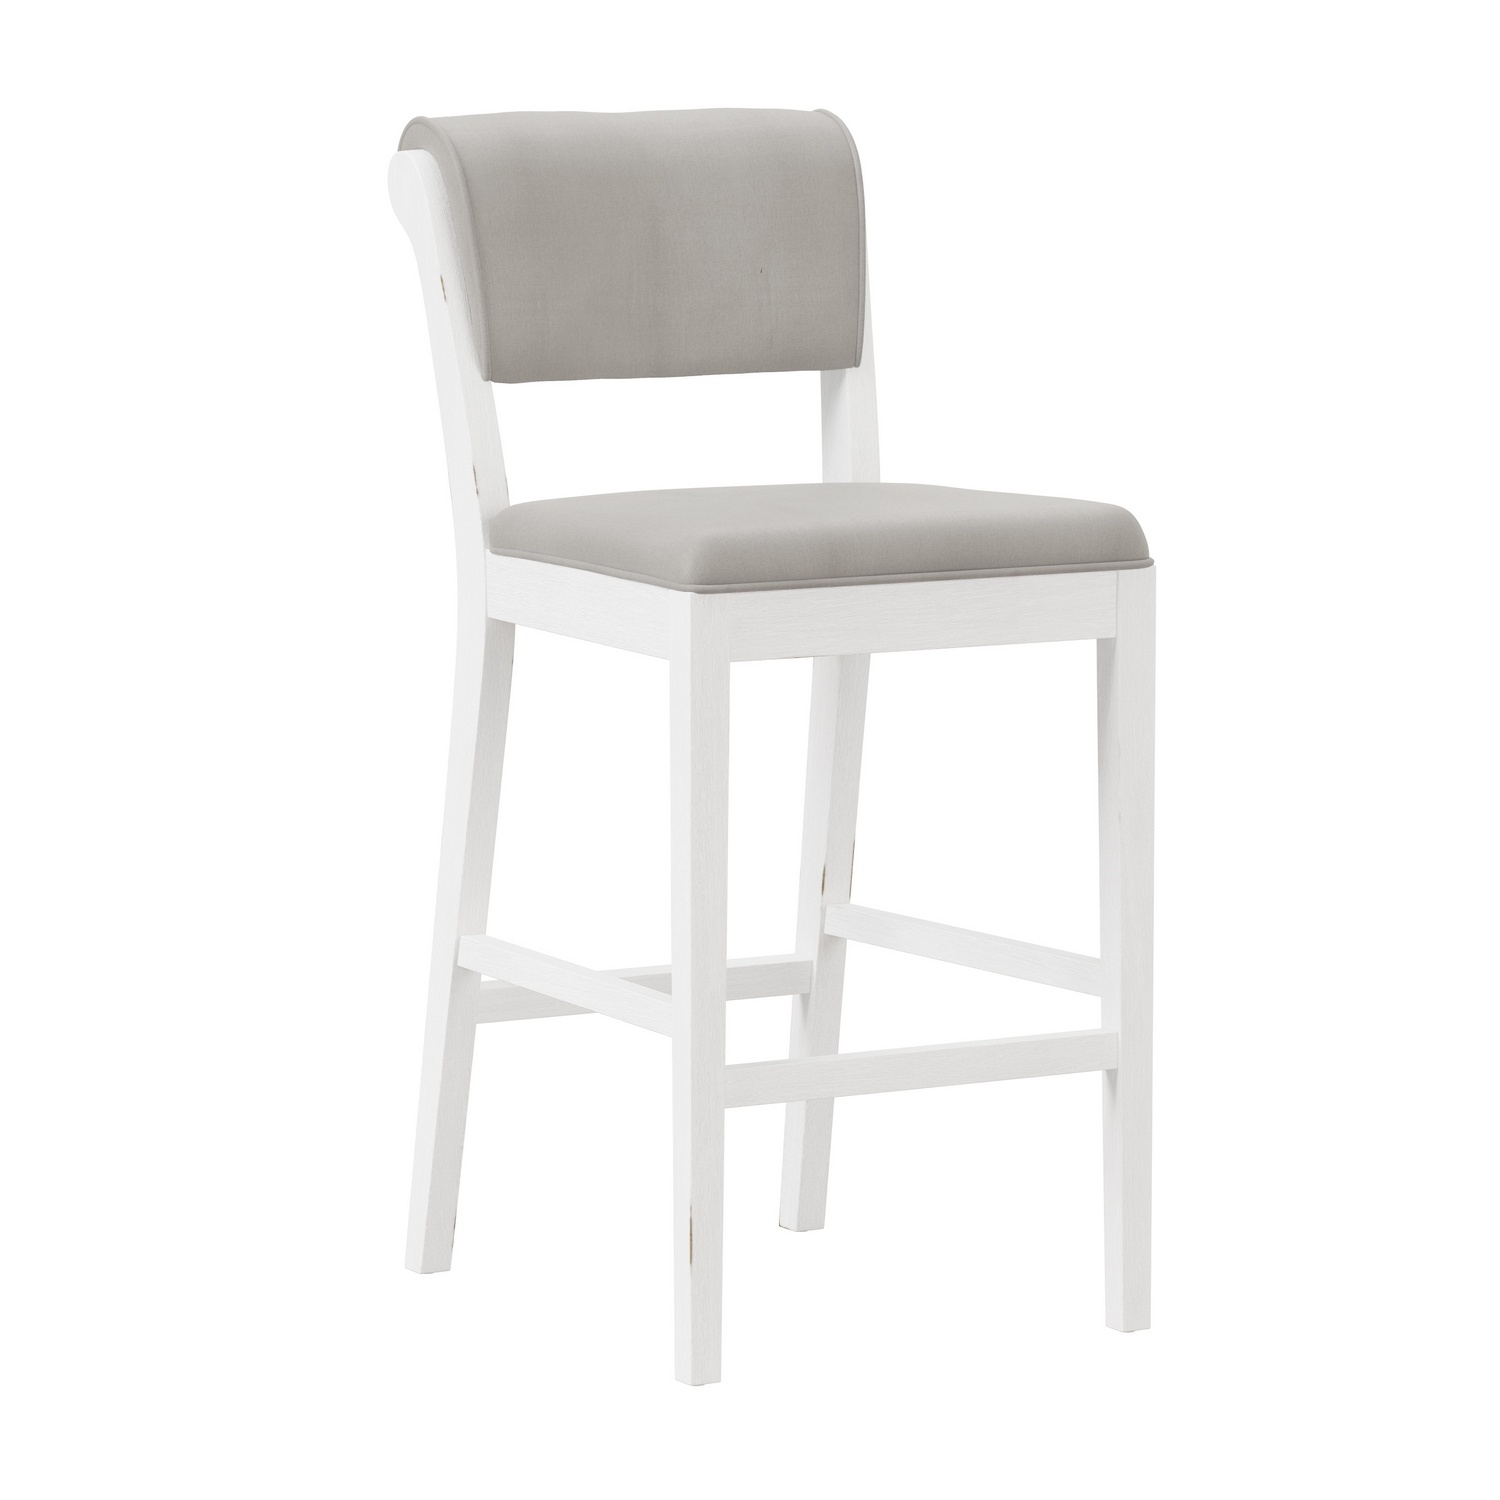 Hillsdale Clarion Wood and Upholstered Panel Back Bar Height Stool - Sea White